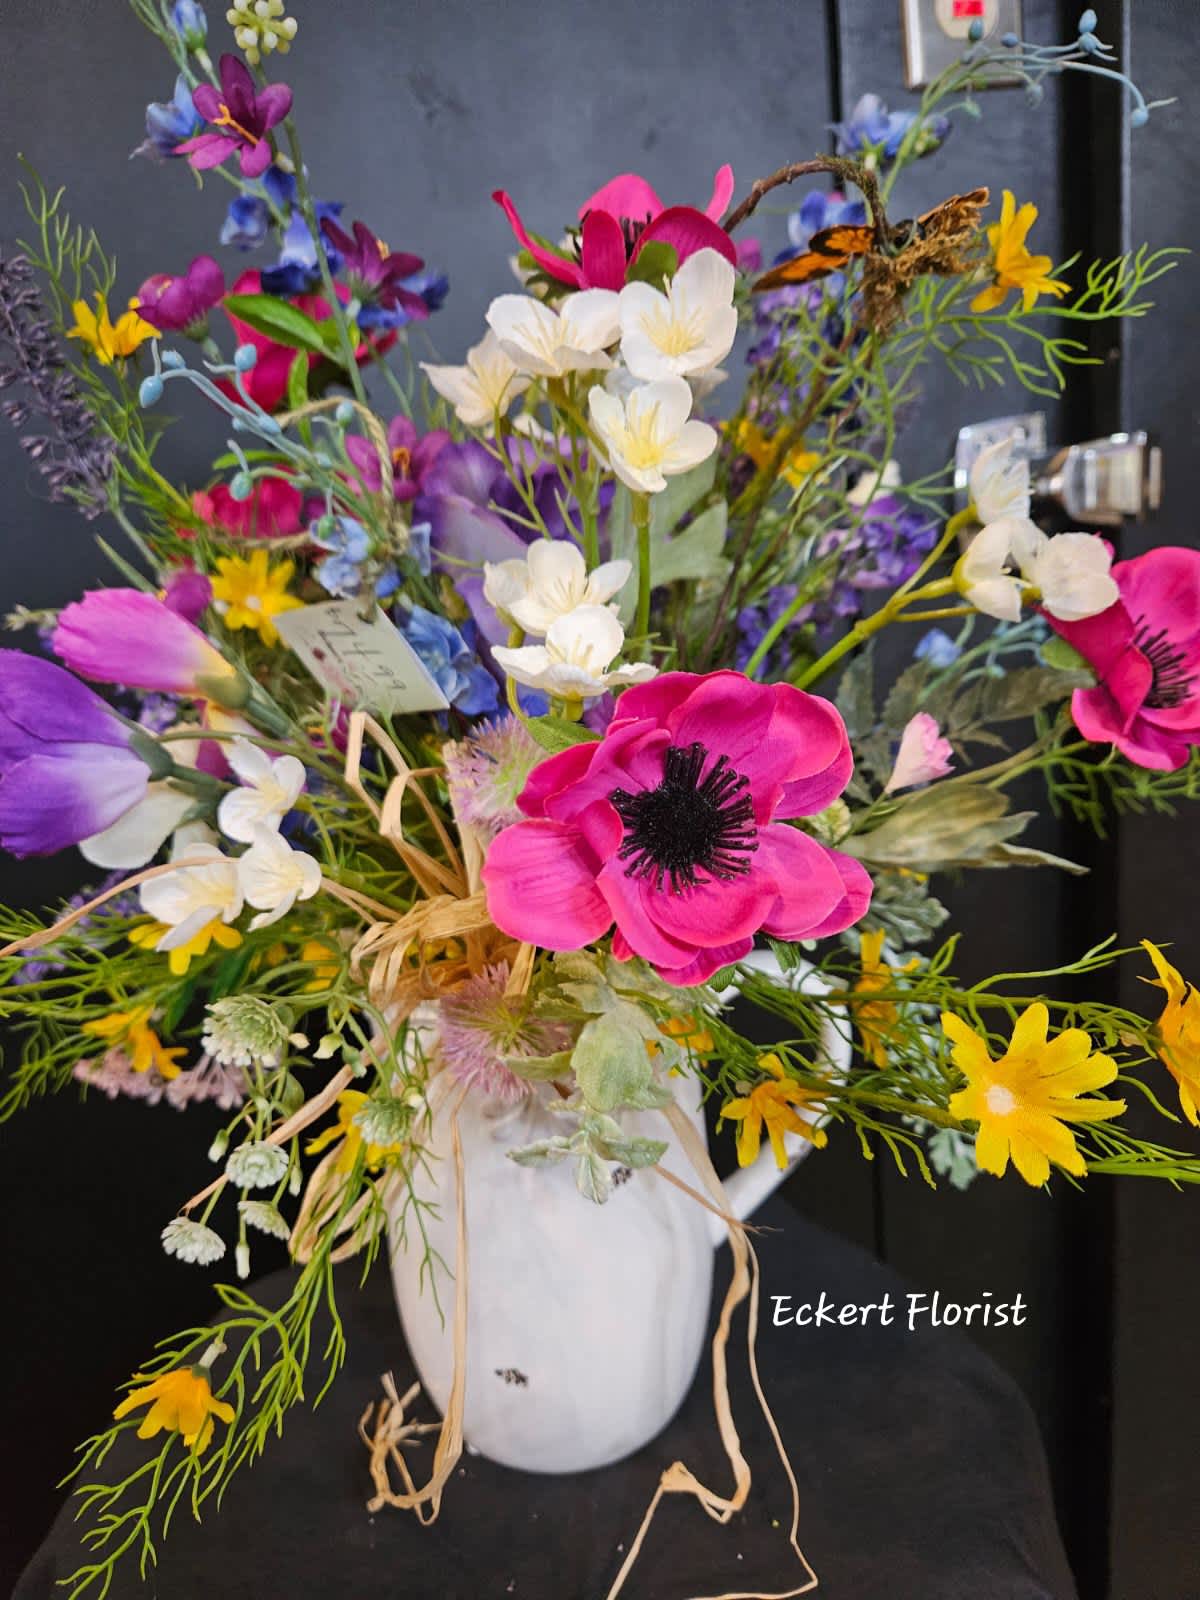 Eckert Florist's Artificial Pitcher Bouquet - Designed in a ceramic pitcher, this one of a kind artificial silk flower arrangement measures approx 21.5&quot; High x 21&quot; Wide *Our local delivery only